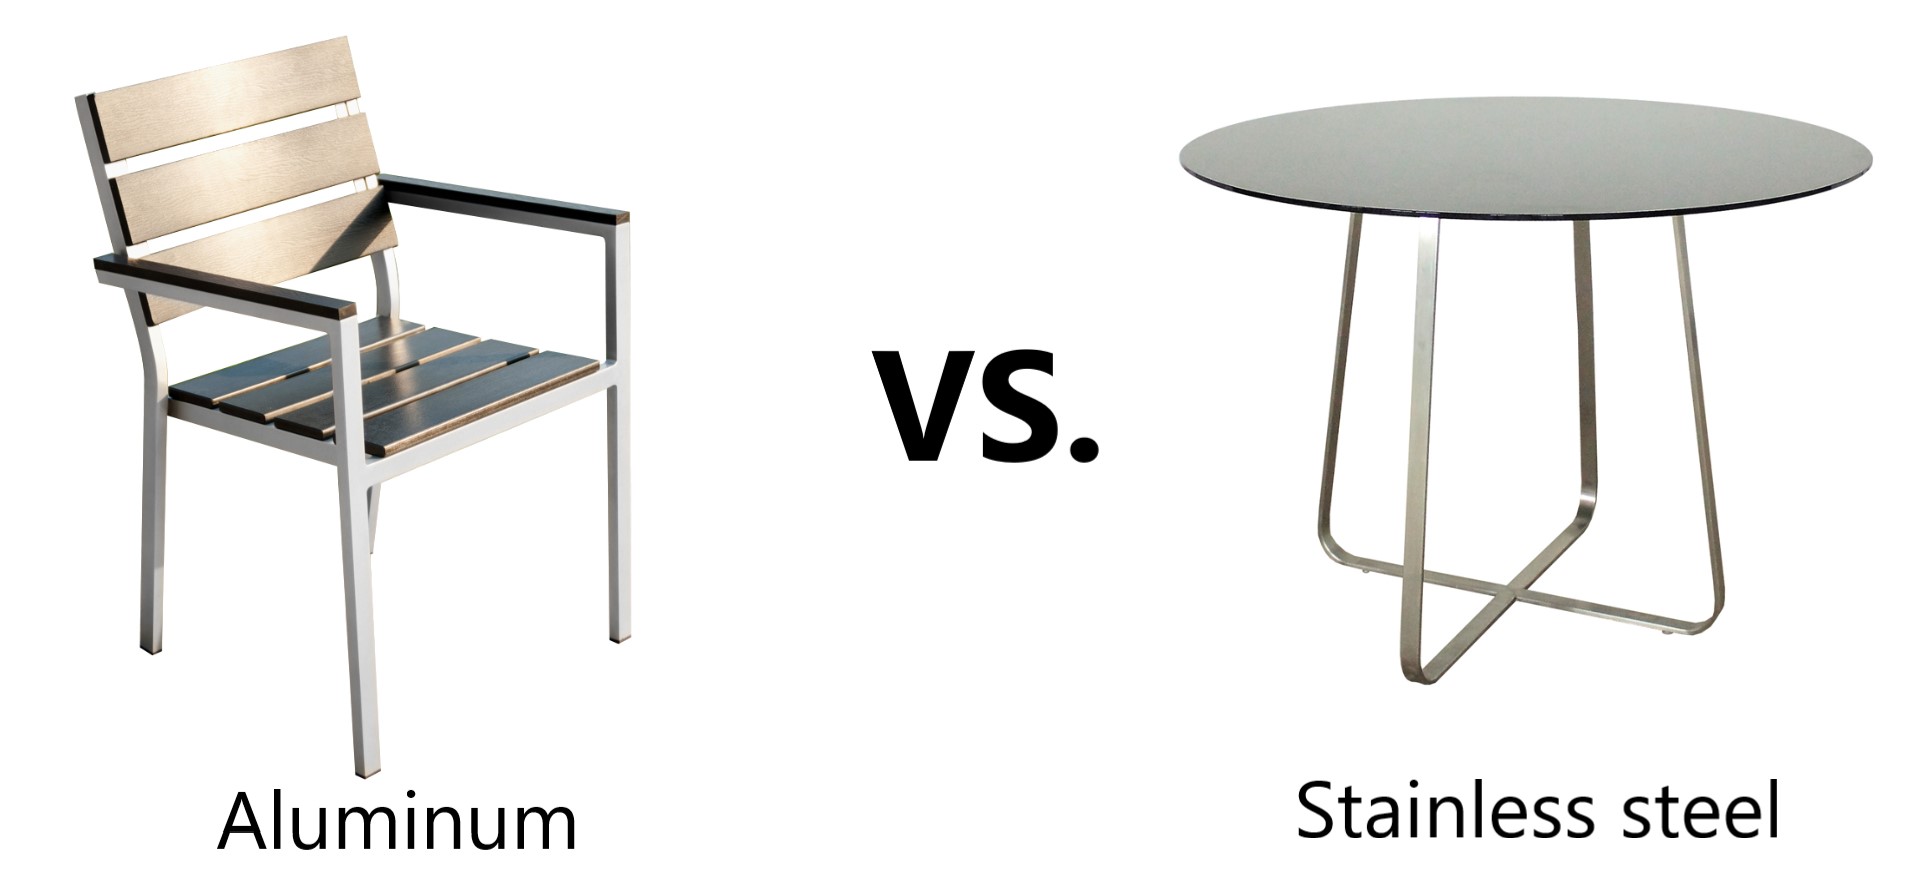 aluminum &stainless steel for outdoor furniture